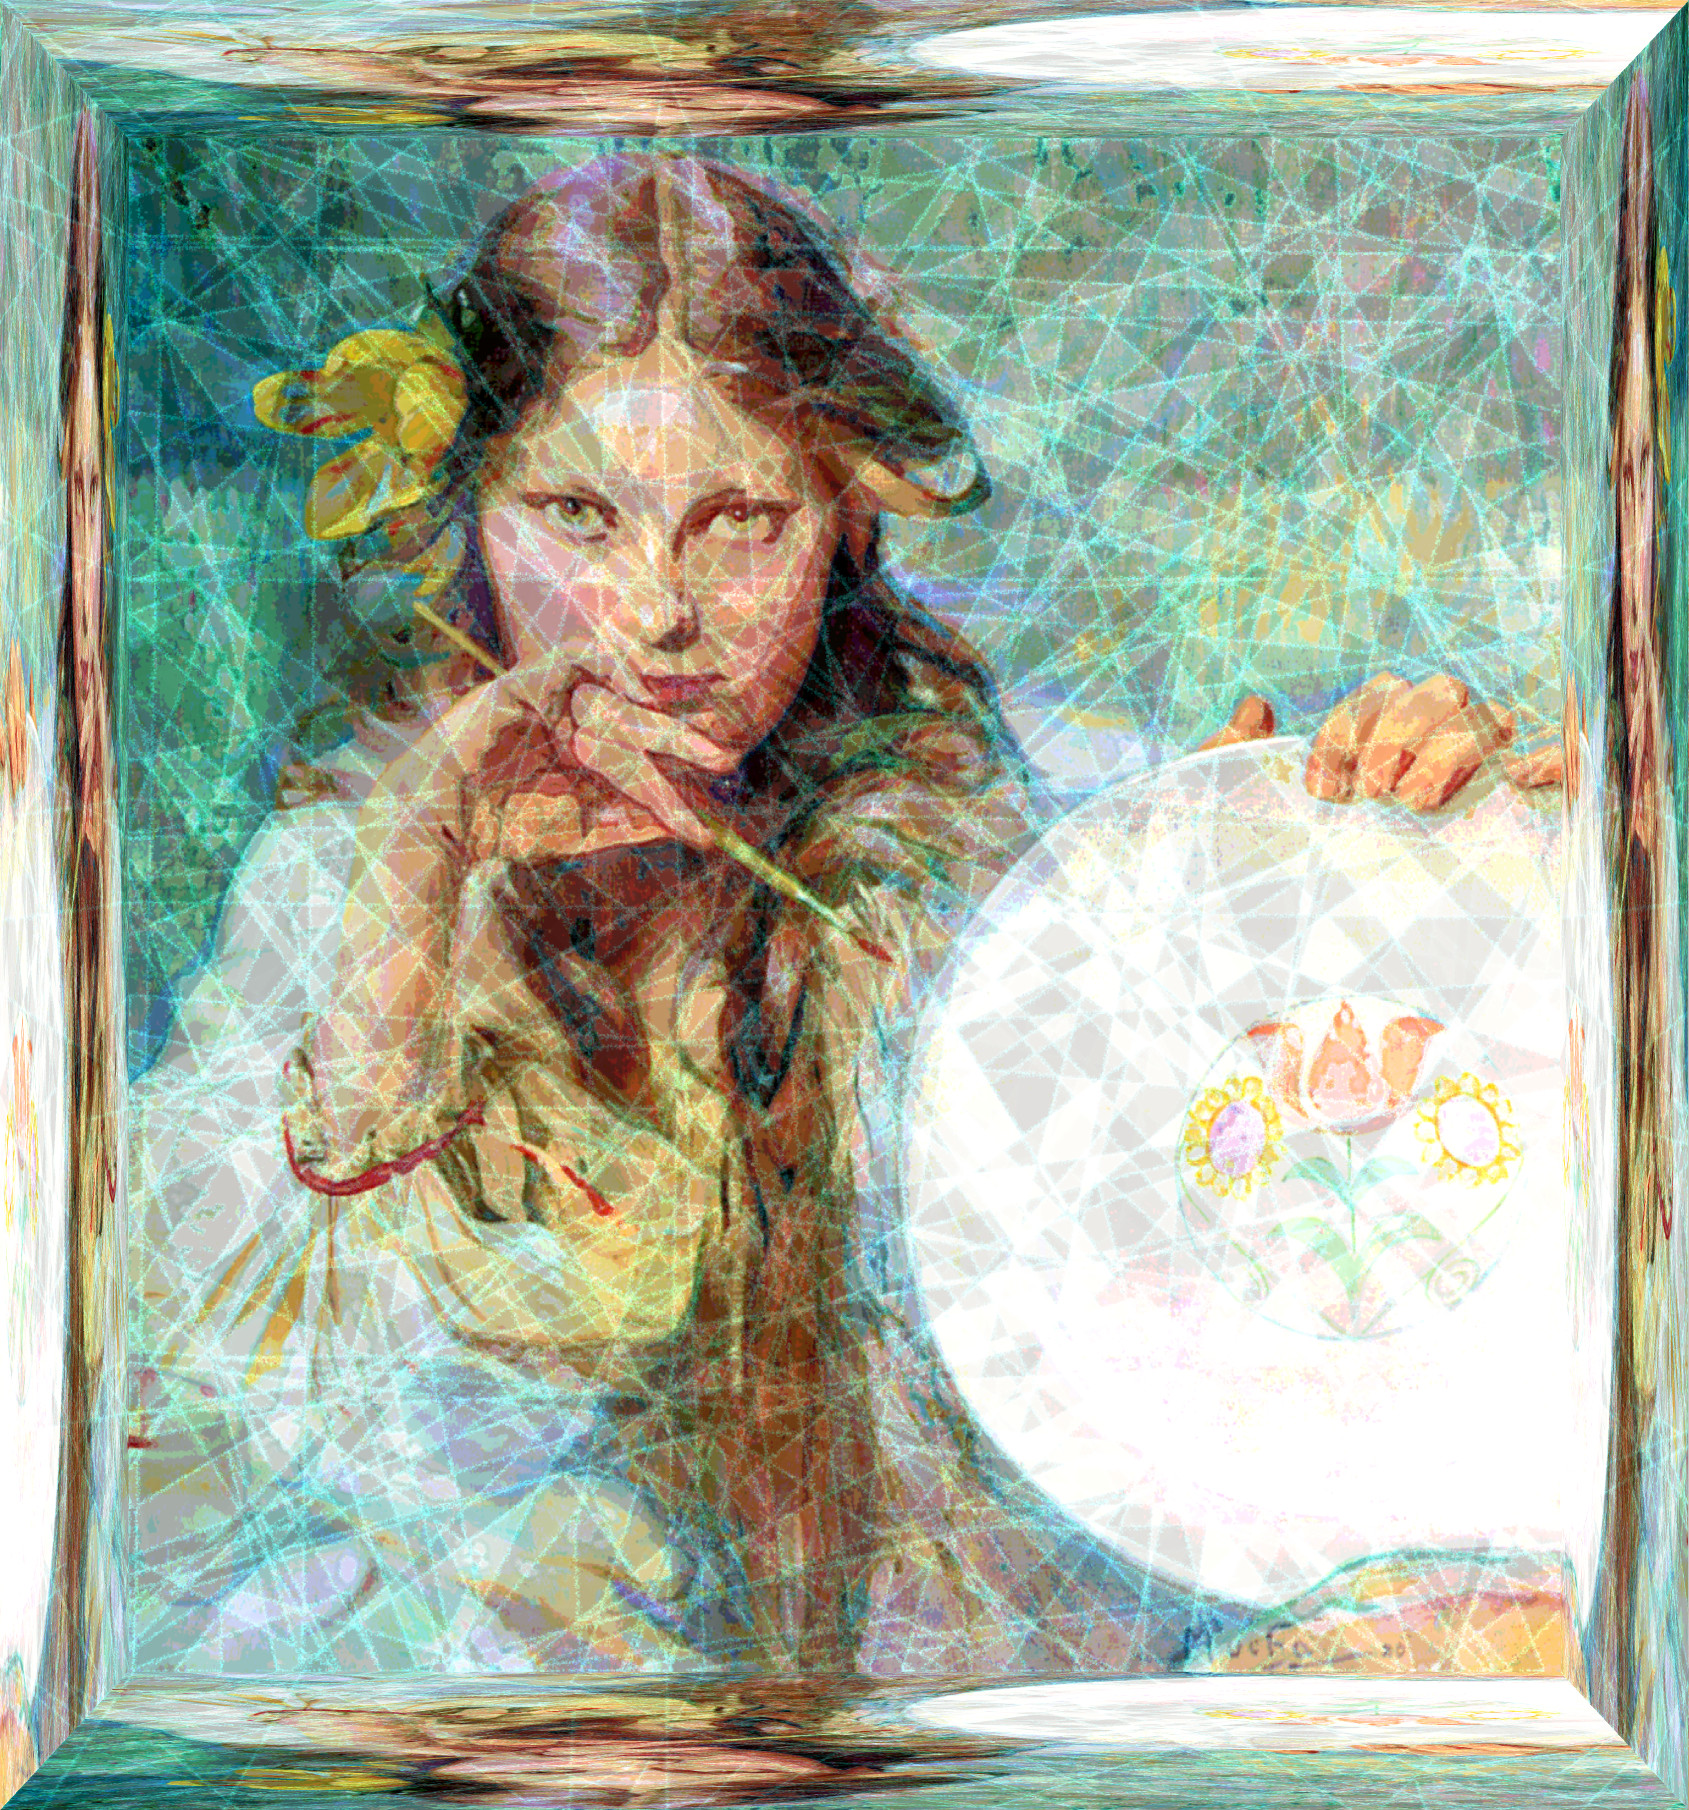 2020-11-04 07-15-51 Mucha_Alphonse_The_Artist_1920_Oil_On_Canvas_On_Board_scaled stroked with crystal background using hue 180 (framed).jpeg